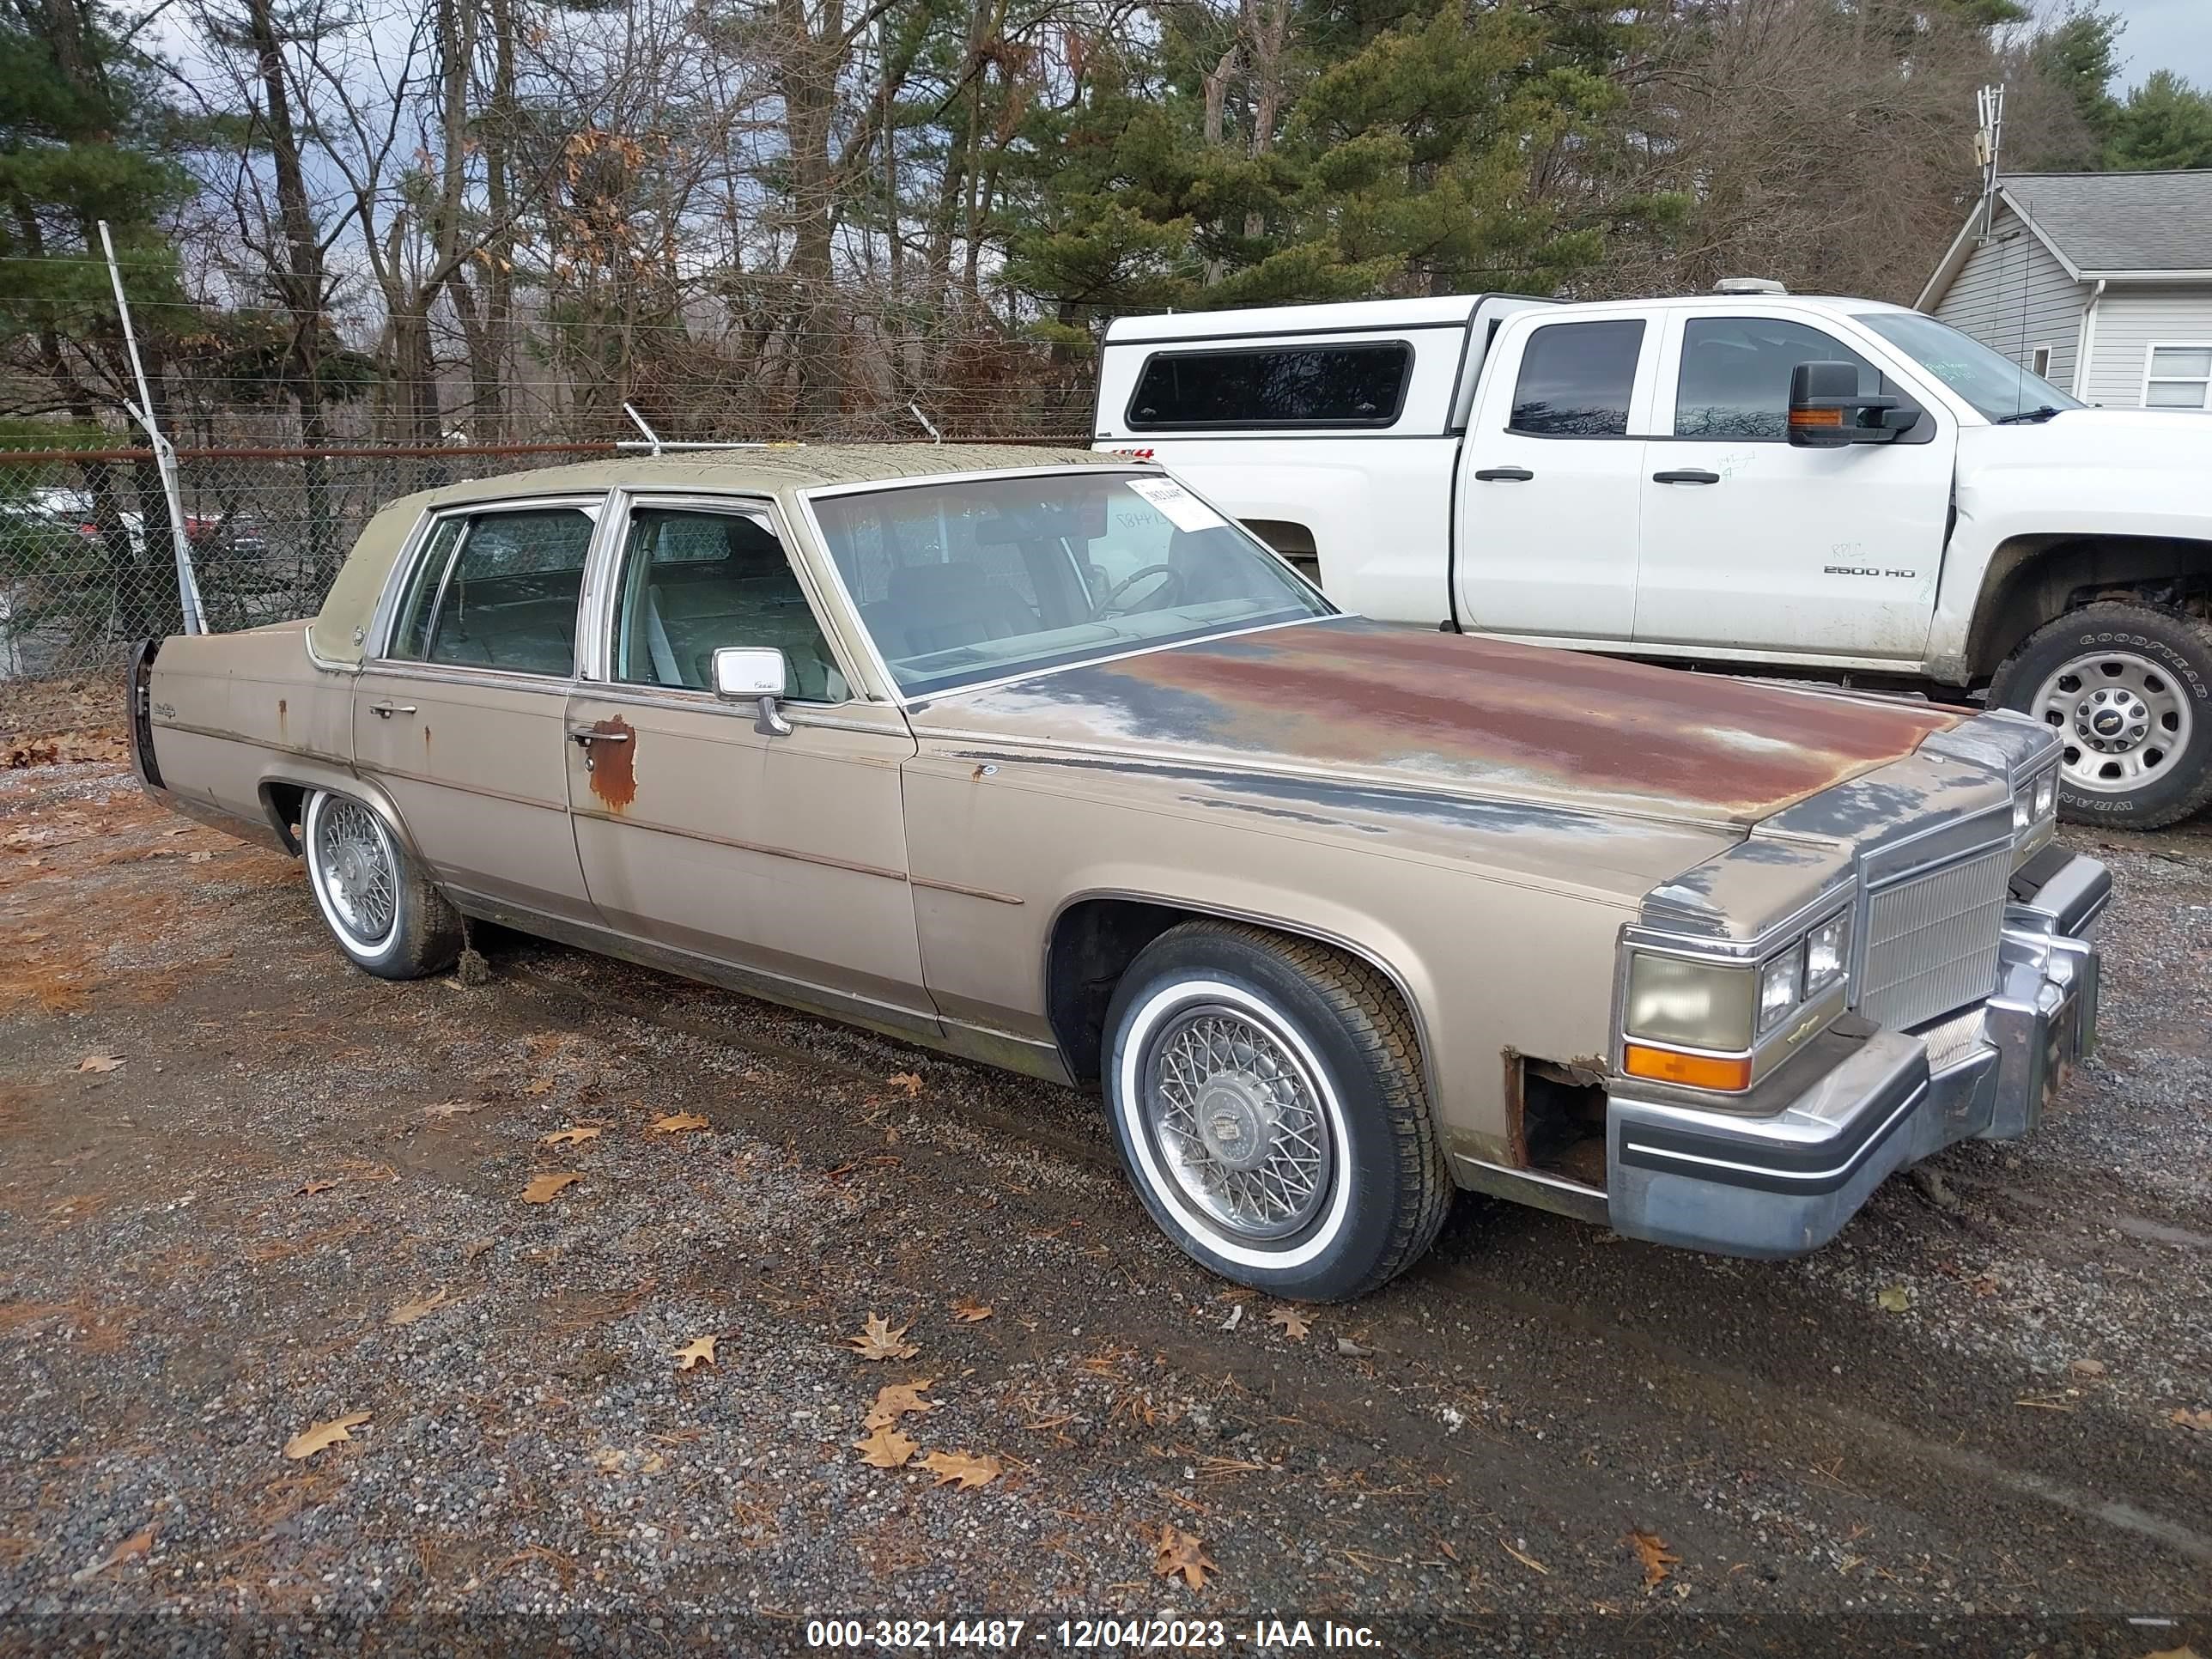 vin: 1G6DW6985F9710210 1G6DW6985F9710210 1985 cadillac fleetwood 4100 for Sale in 44663, 2932 State Route 259 Se, New Philadelphia, Ohio, USA